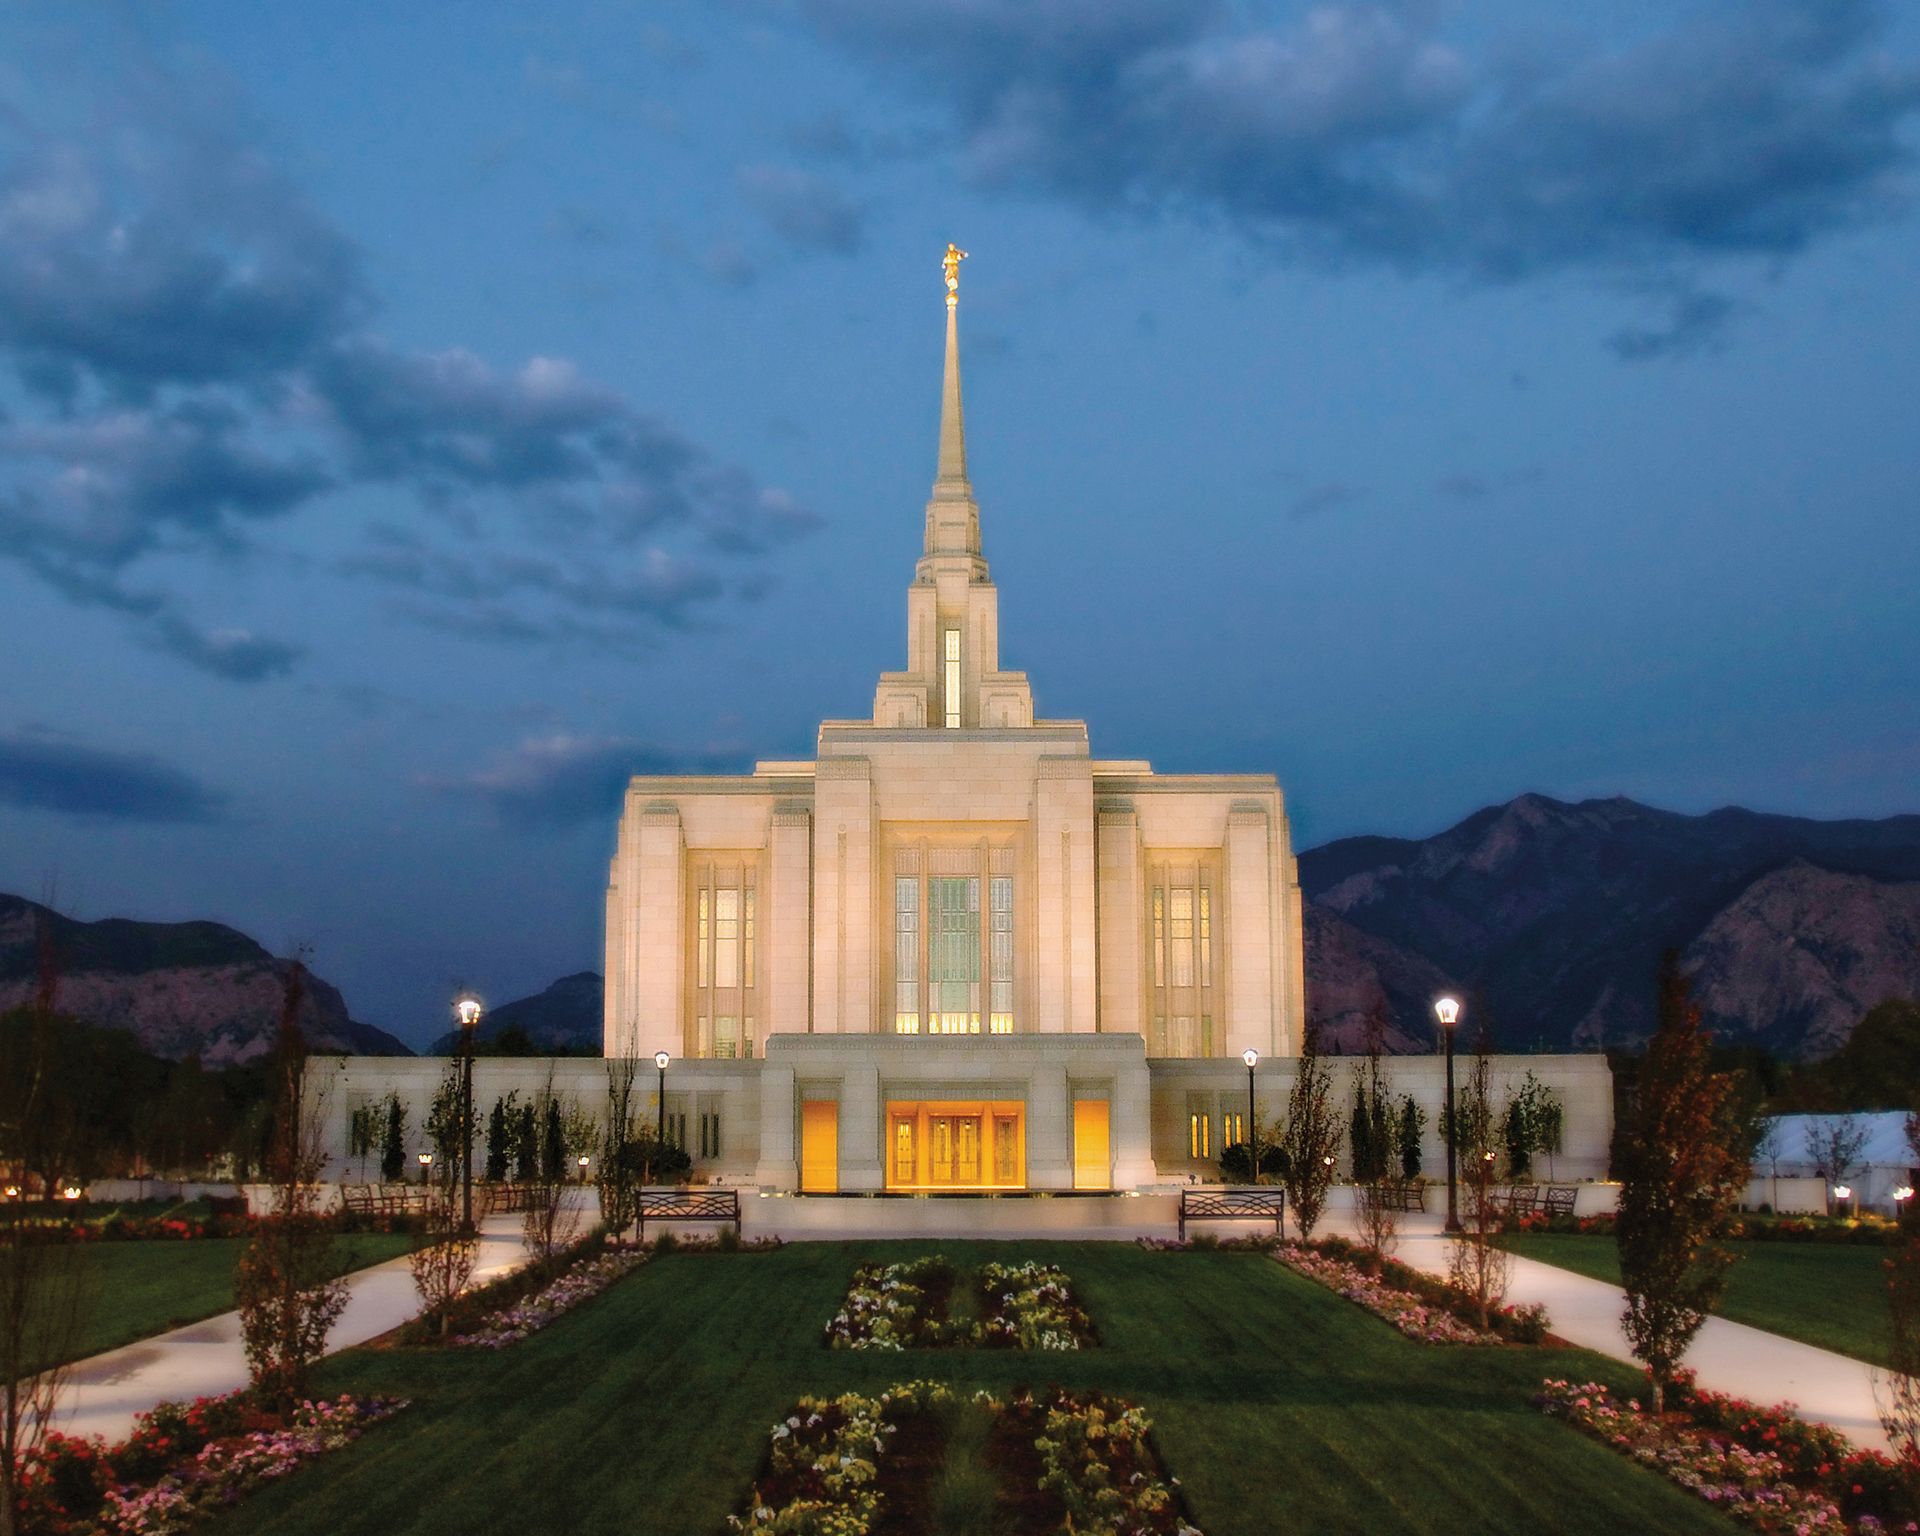 The Ogden Utah Temple lit up in the evening.